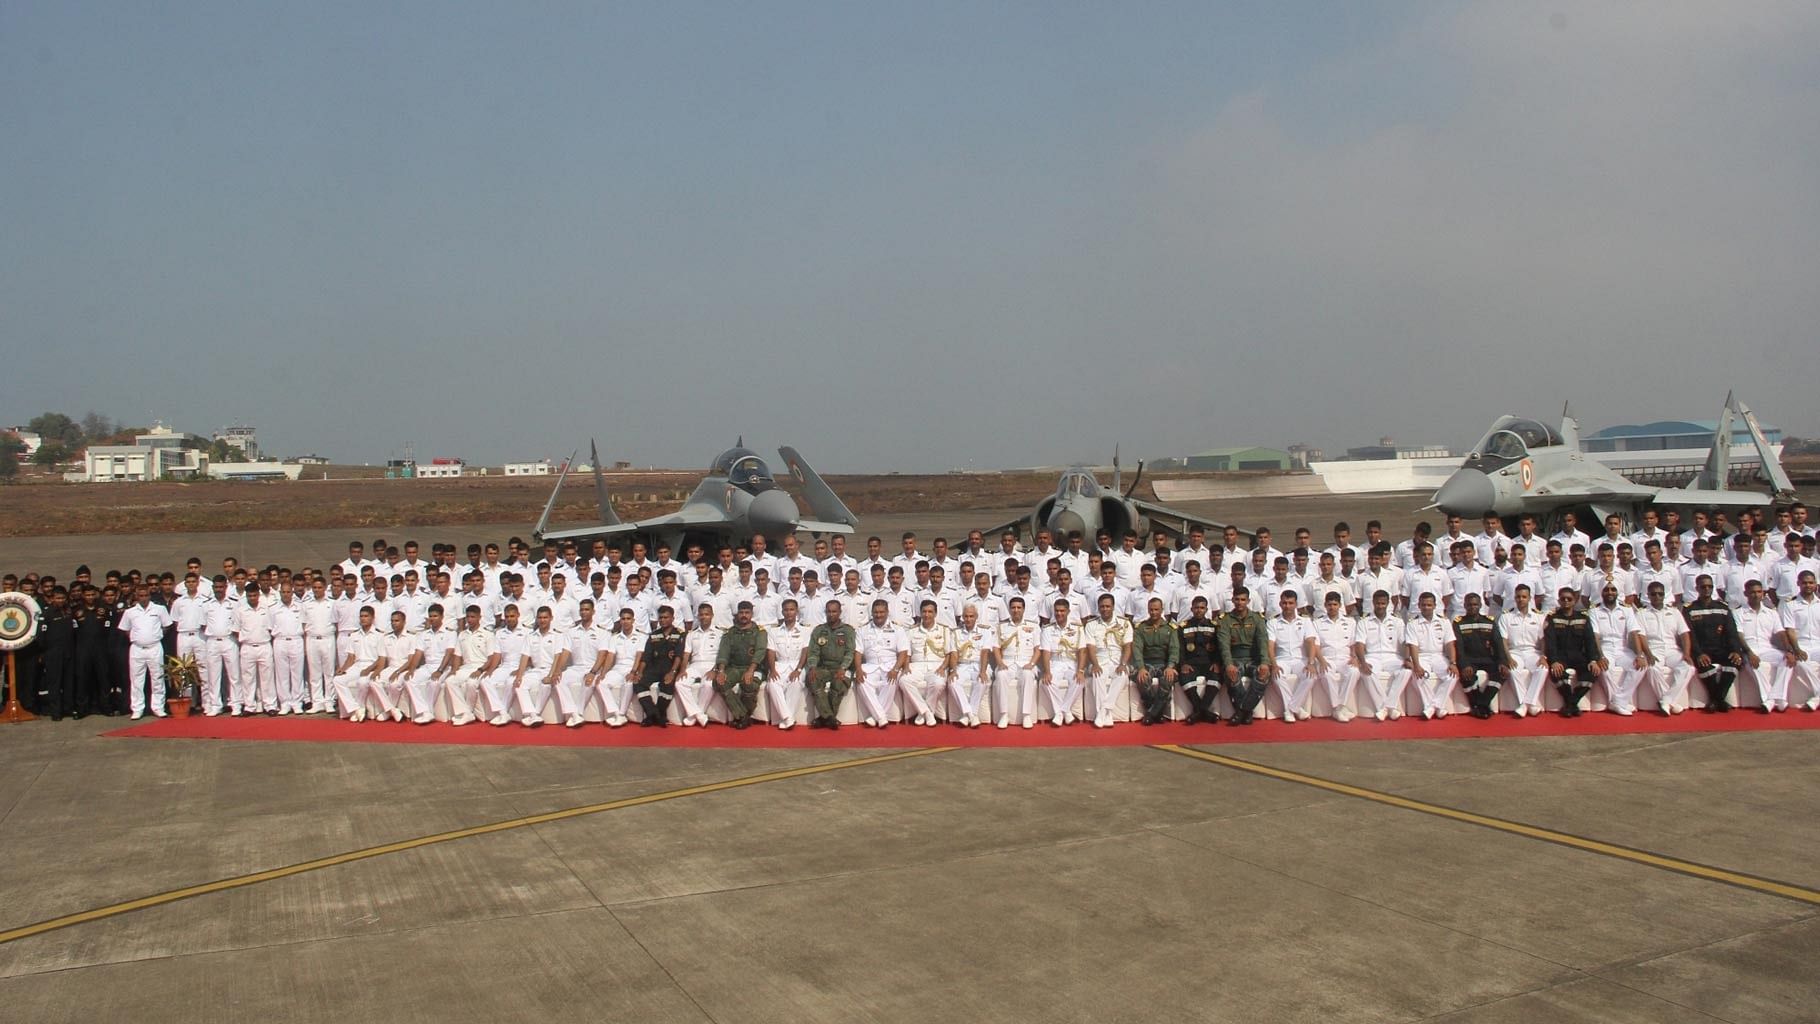 The outgoing Sea Harriers flanked by the newly inducted MiG 29K fighters of Indian Navy during the de-induction of Sea Harriers and Induction of the MiG 29K in Dabolim, Goa on 11 May 2016. (Photo: IANS)